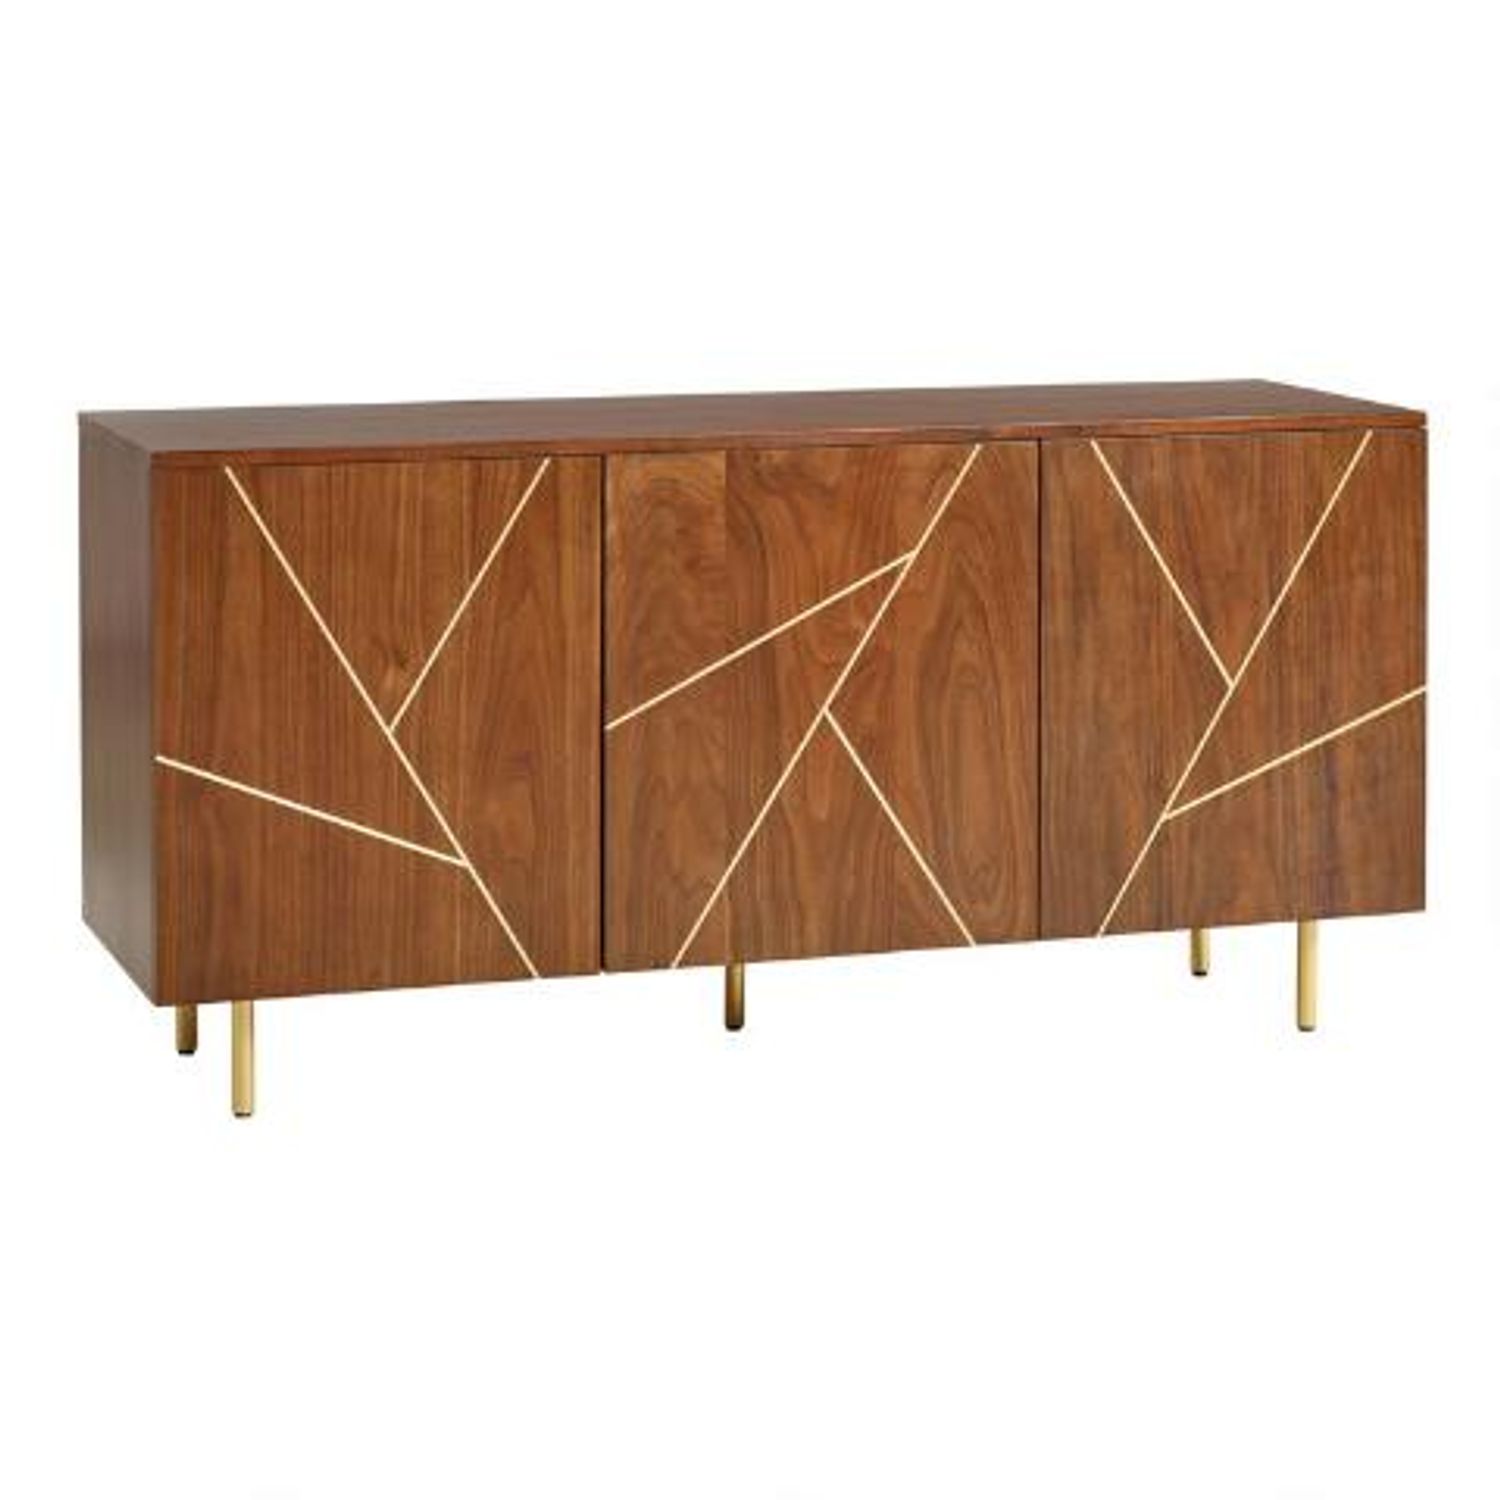 Shop Spiced Auburn Wood And Brass Inlay Dustin Storage Cabinet from World Market on Openhaus